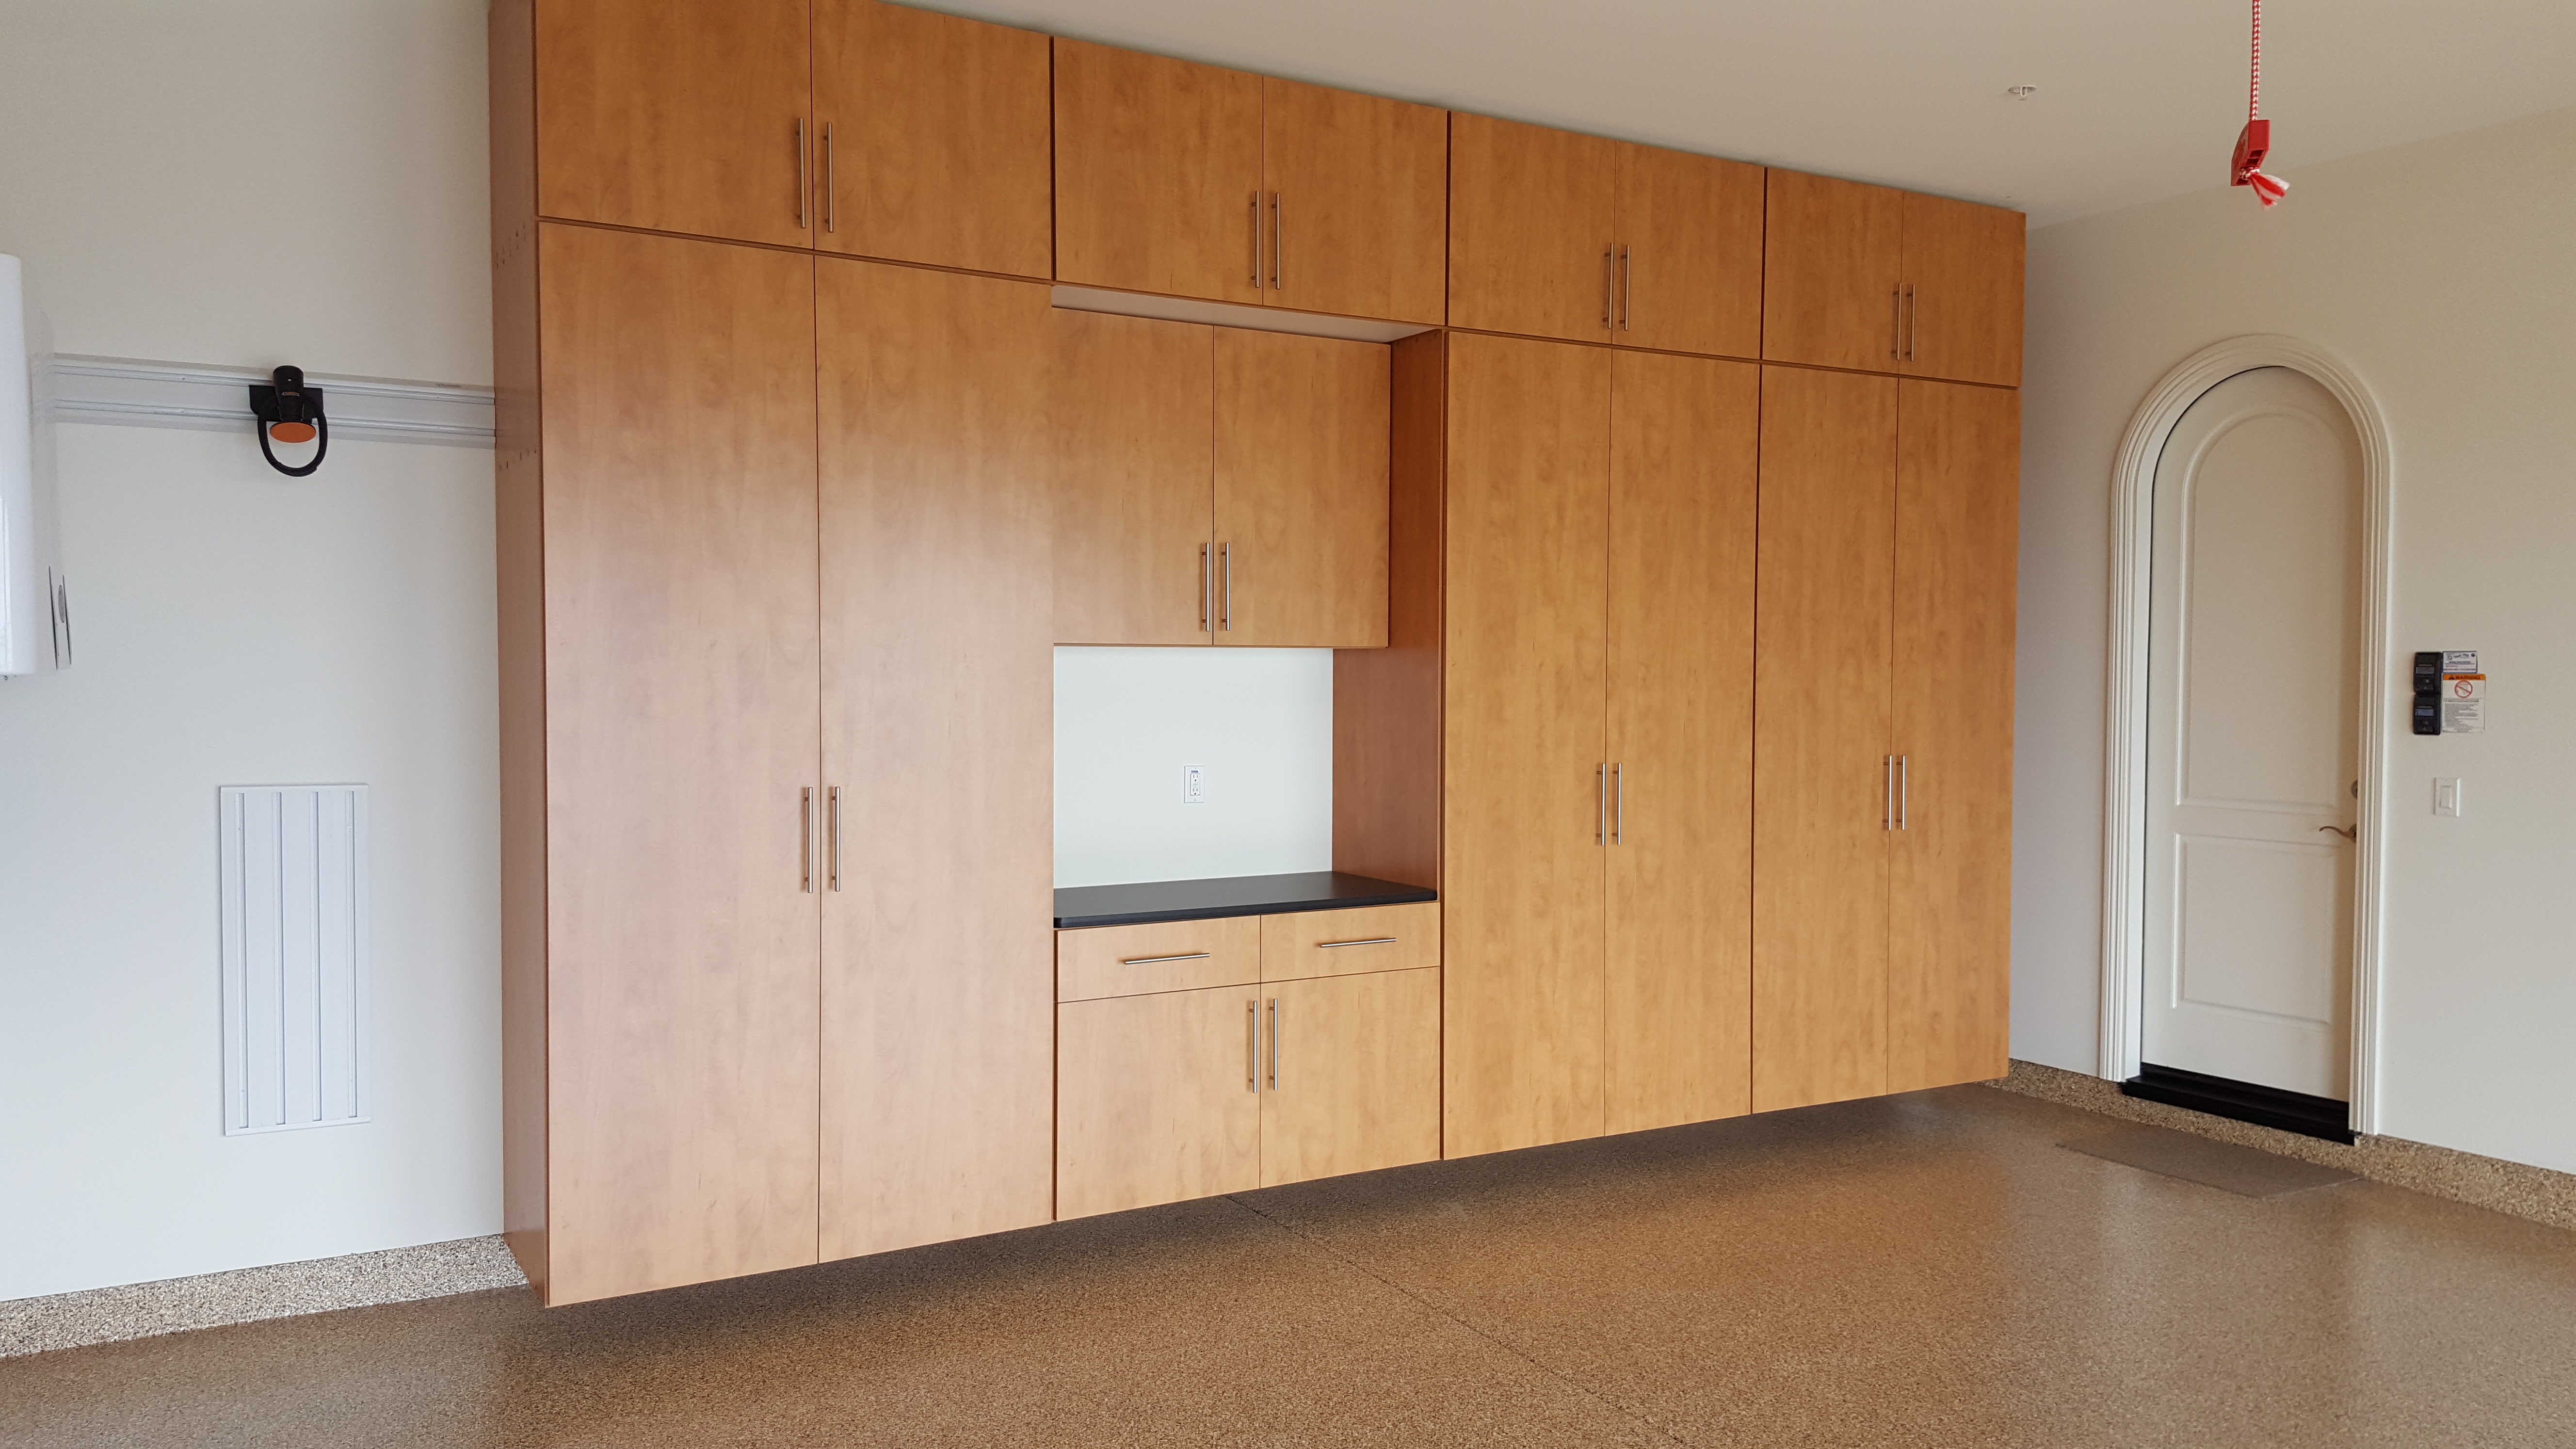 Why We Use Industrial Strength Particle Board For Garage Cabinets